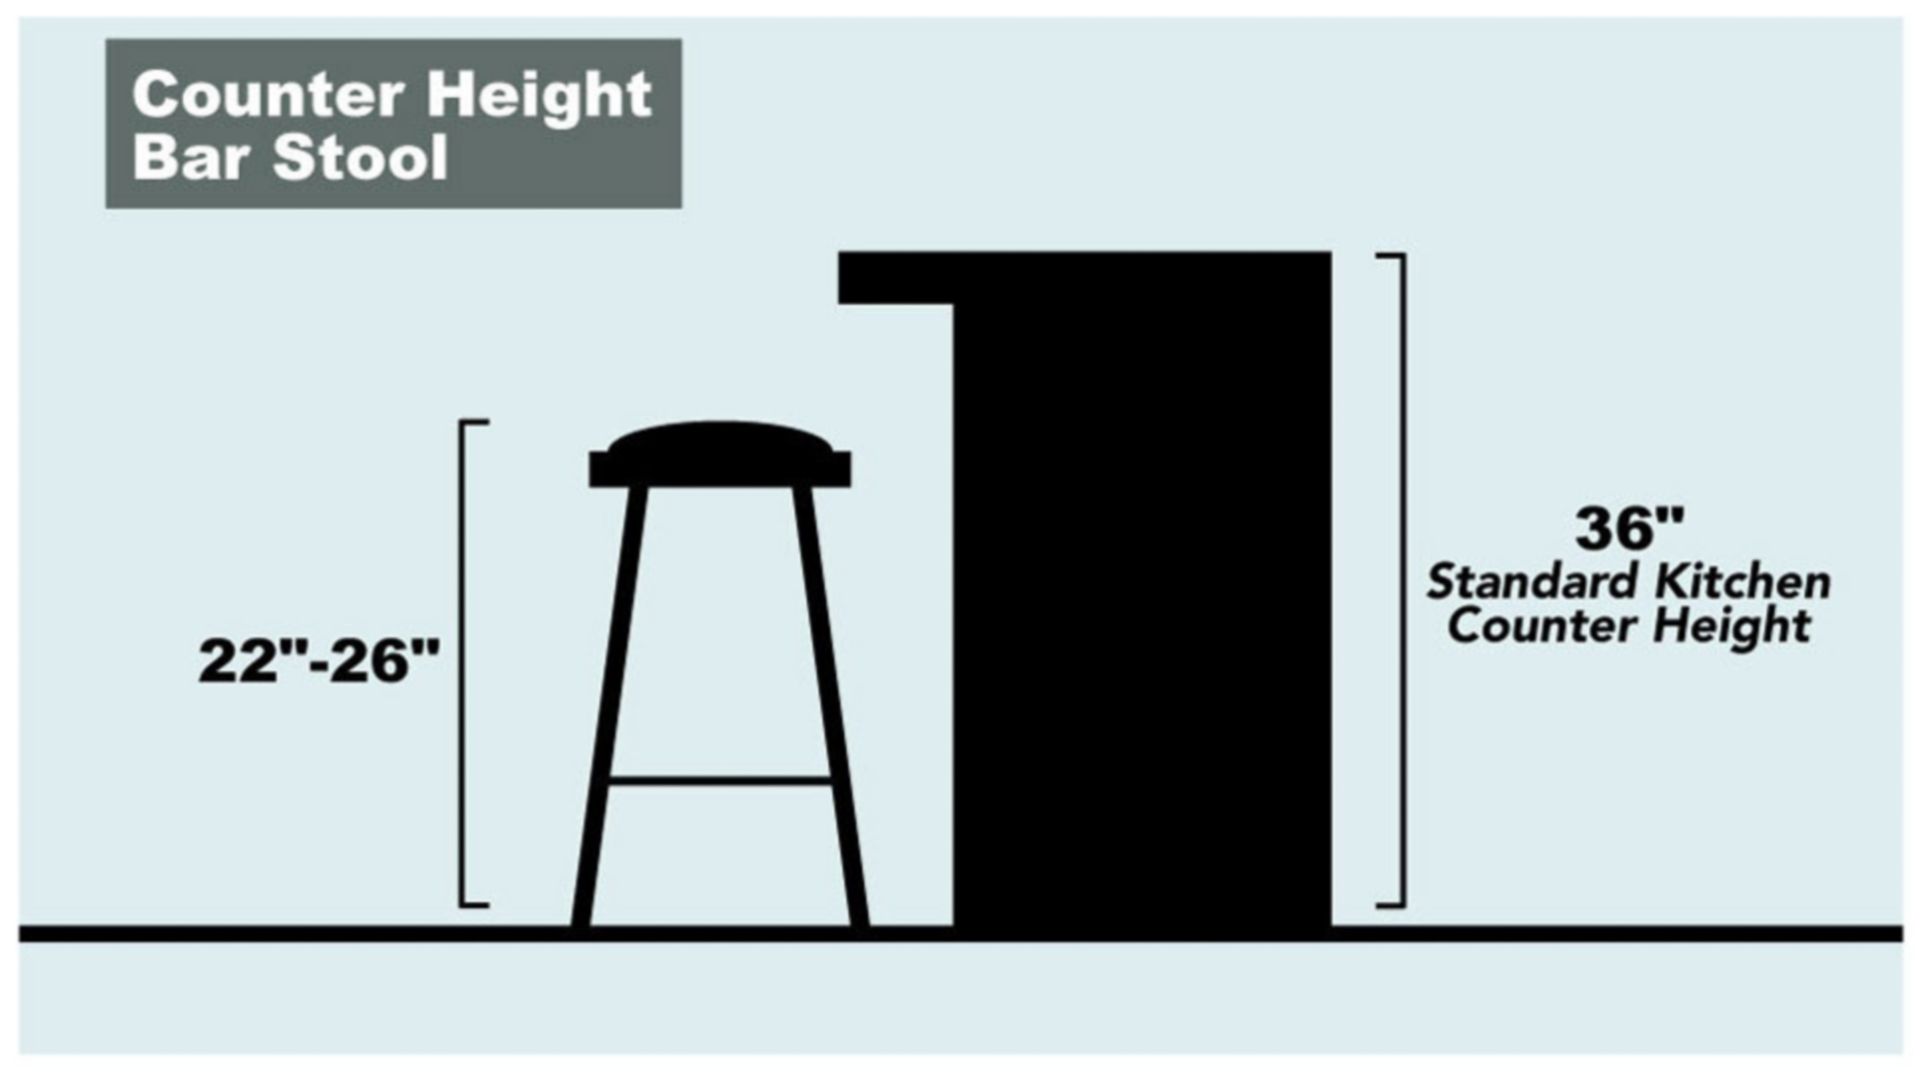 Counter Height Bar Stool. 22-26 inches. Fits under 36inch standard kitchen Counter.